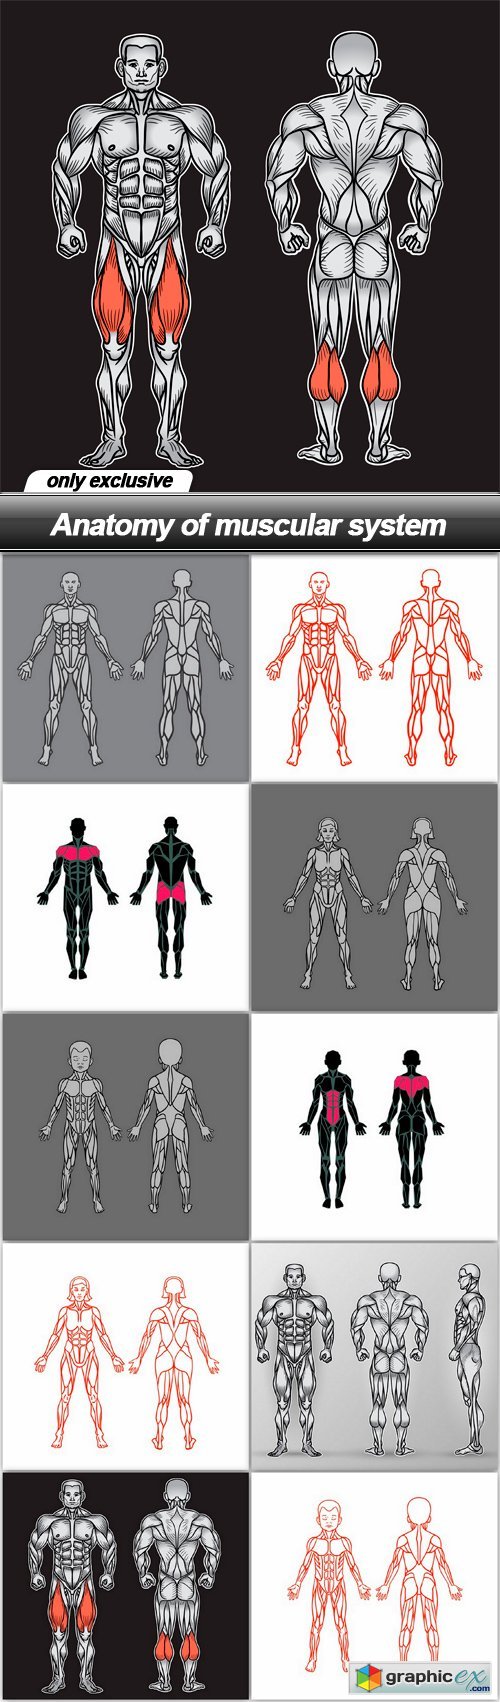 Anatomy of muscular system - 10 EPS